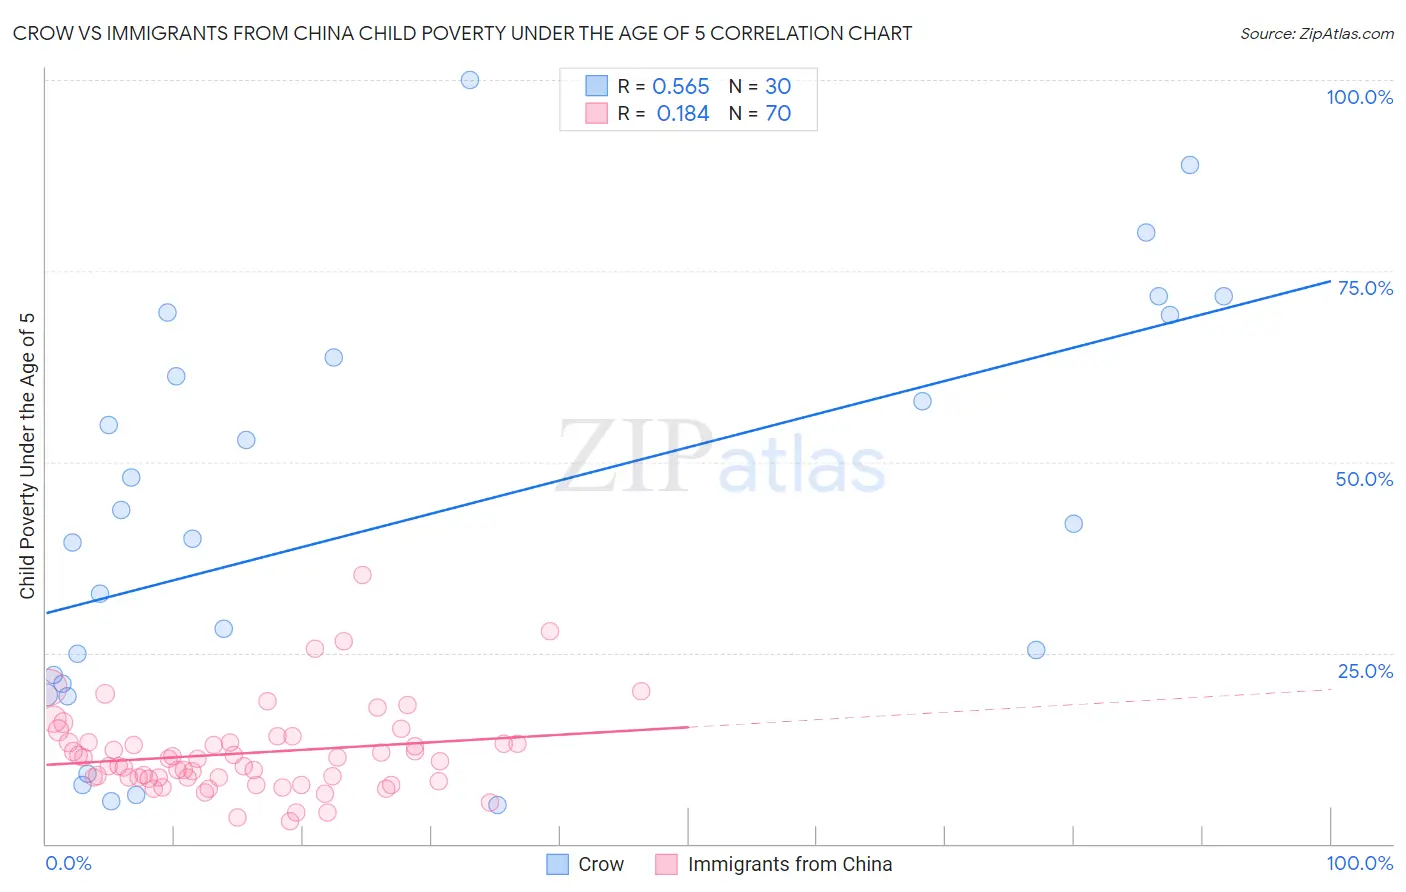 Crow vs Immigrants from China Child Poverty Under the Age of 5